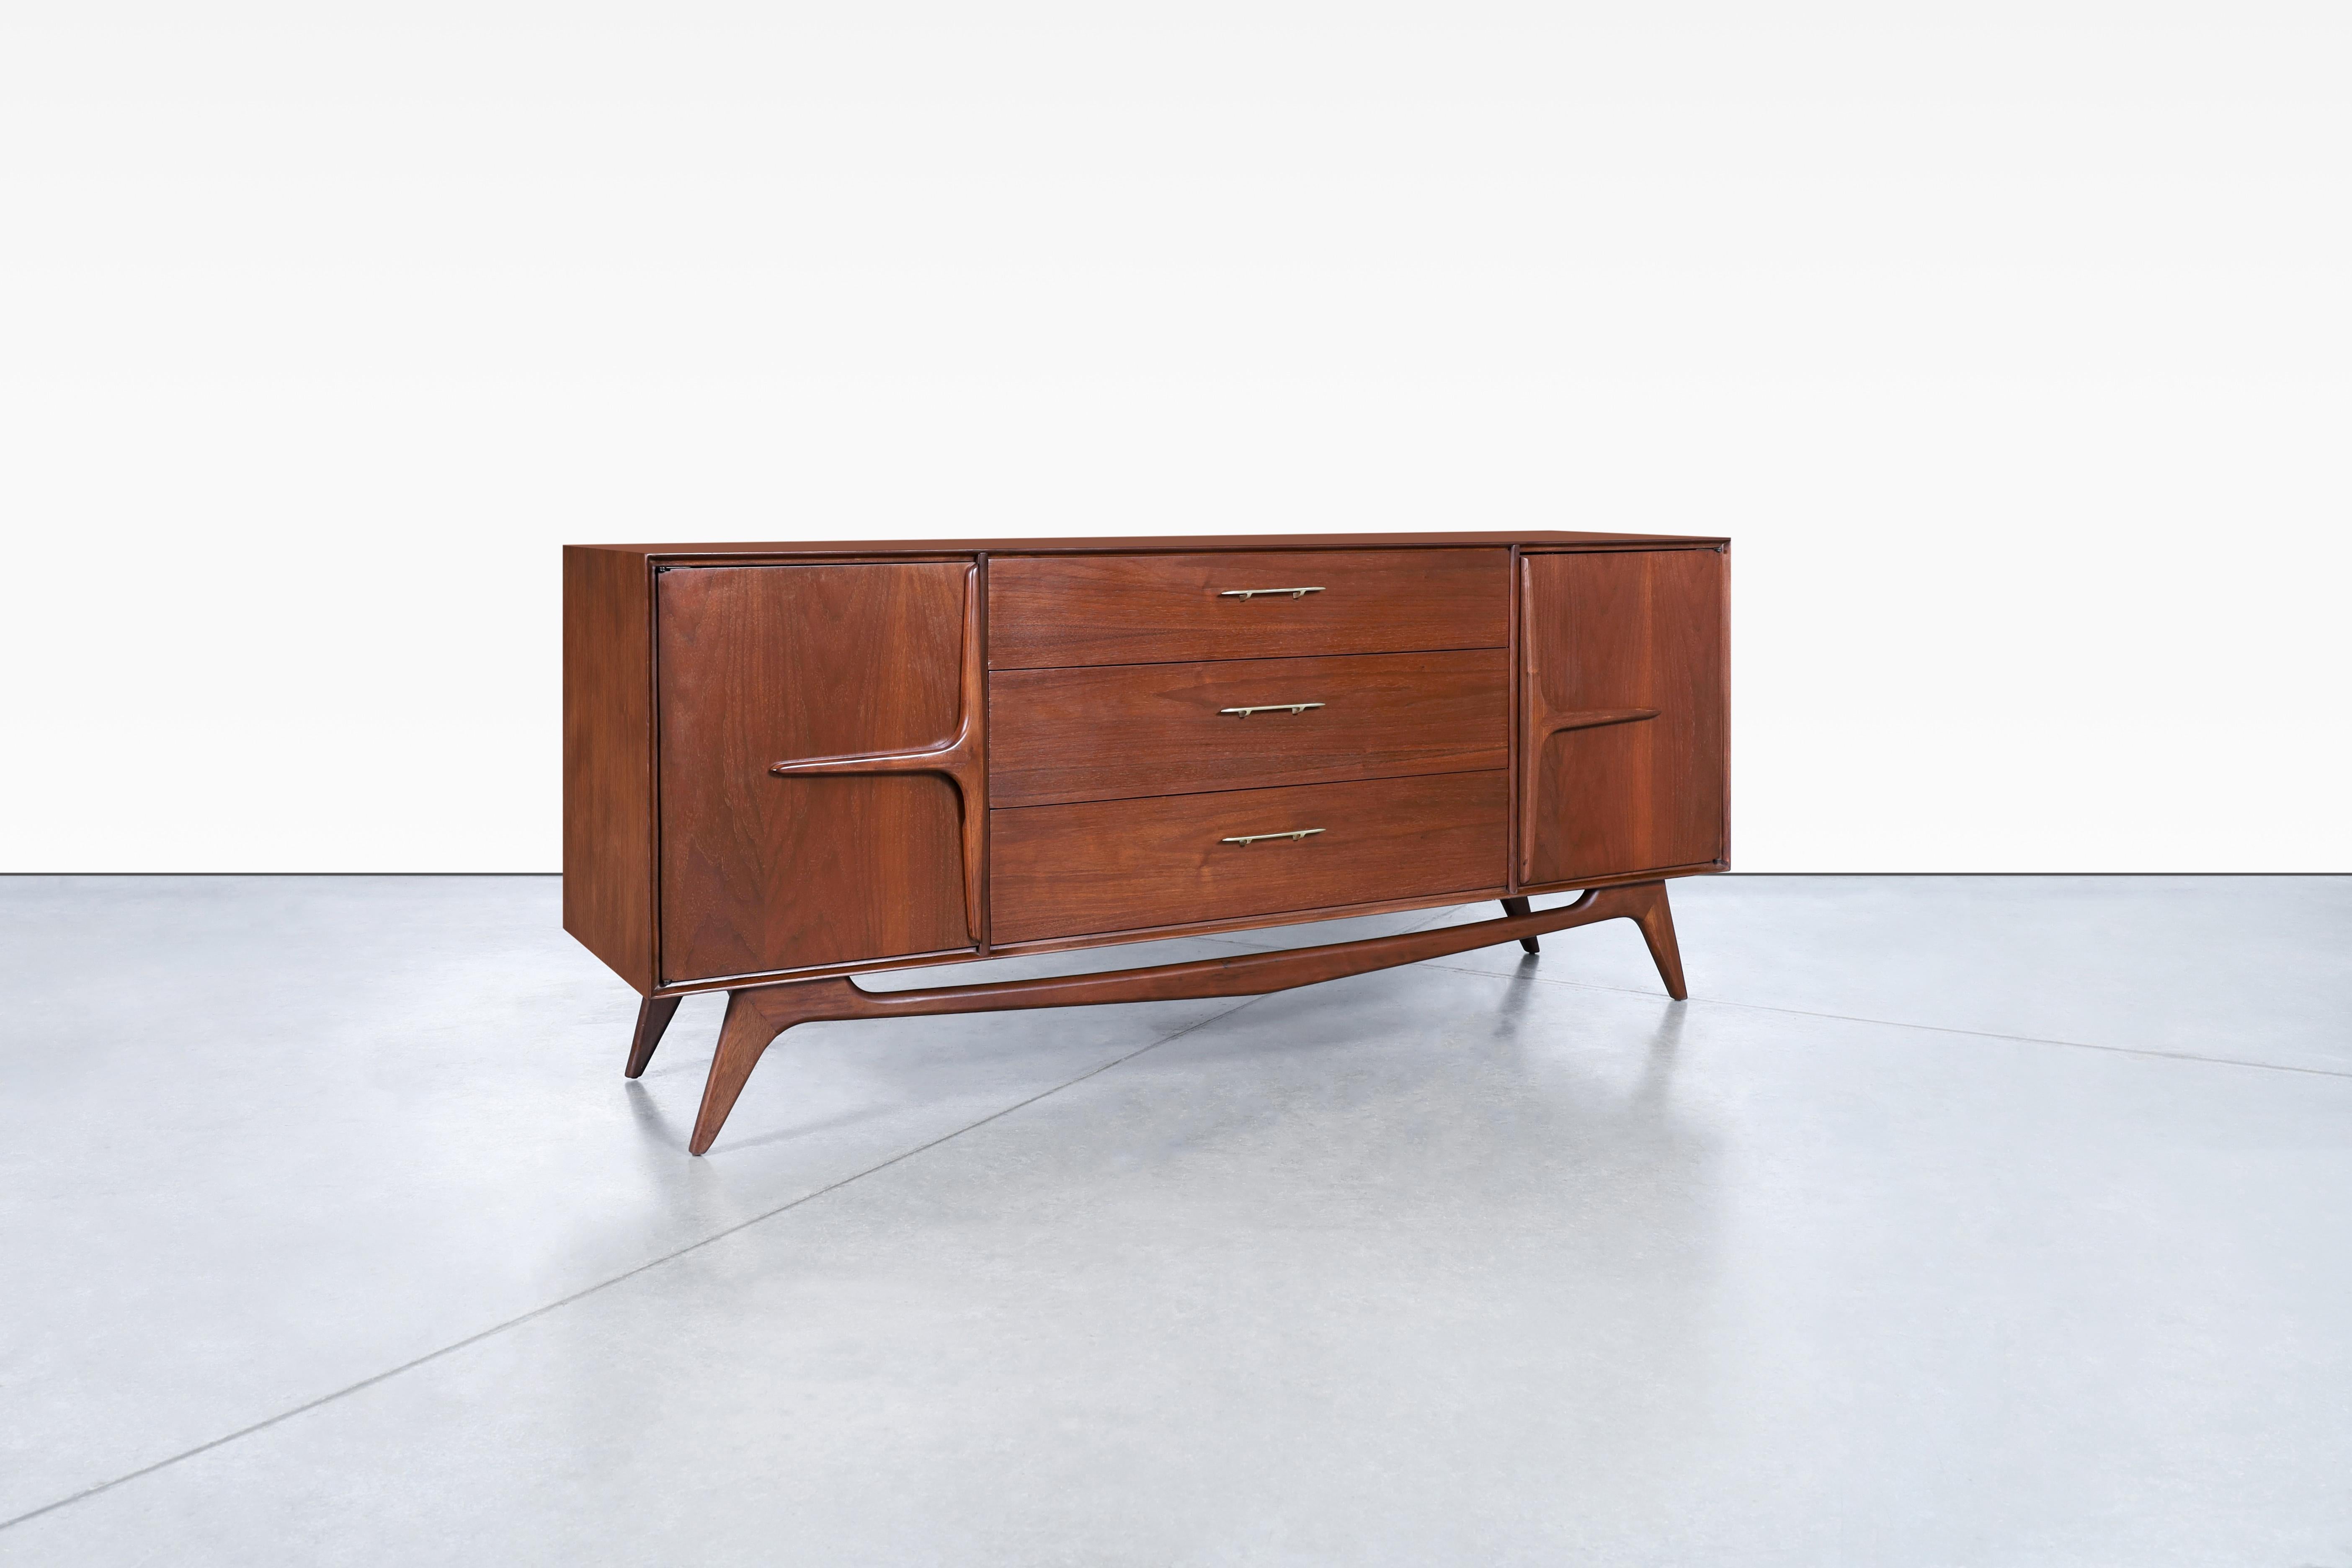 Wonderful mid-century modern sculptural walnut dresser, manufactured in the United States, circa 1950s. This dresser is a masterpiece, crafted from the highest quality walnut wood with a daring design that is bound to catch your eye. The solid brass